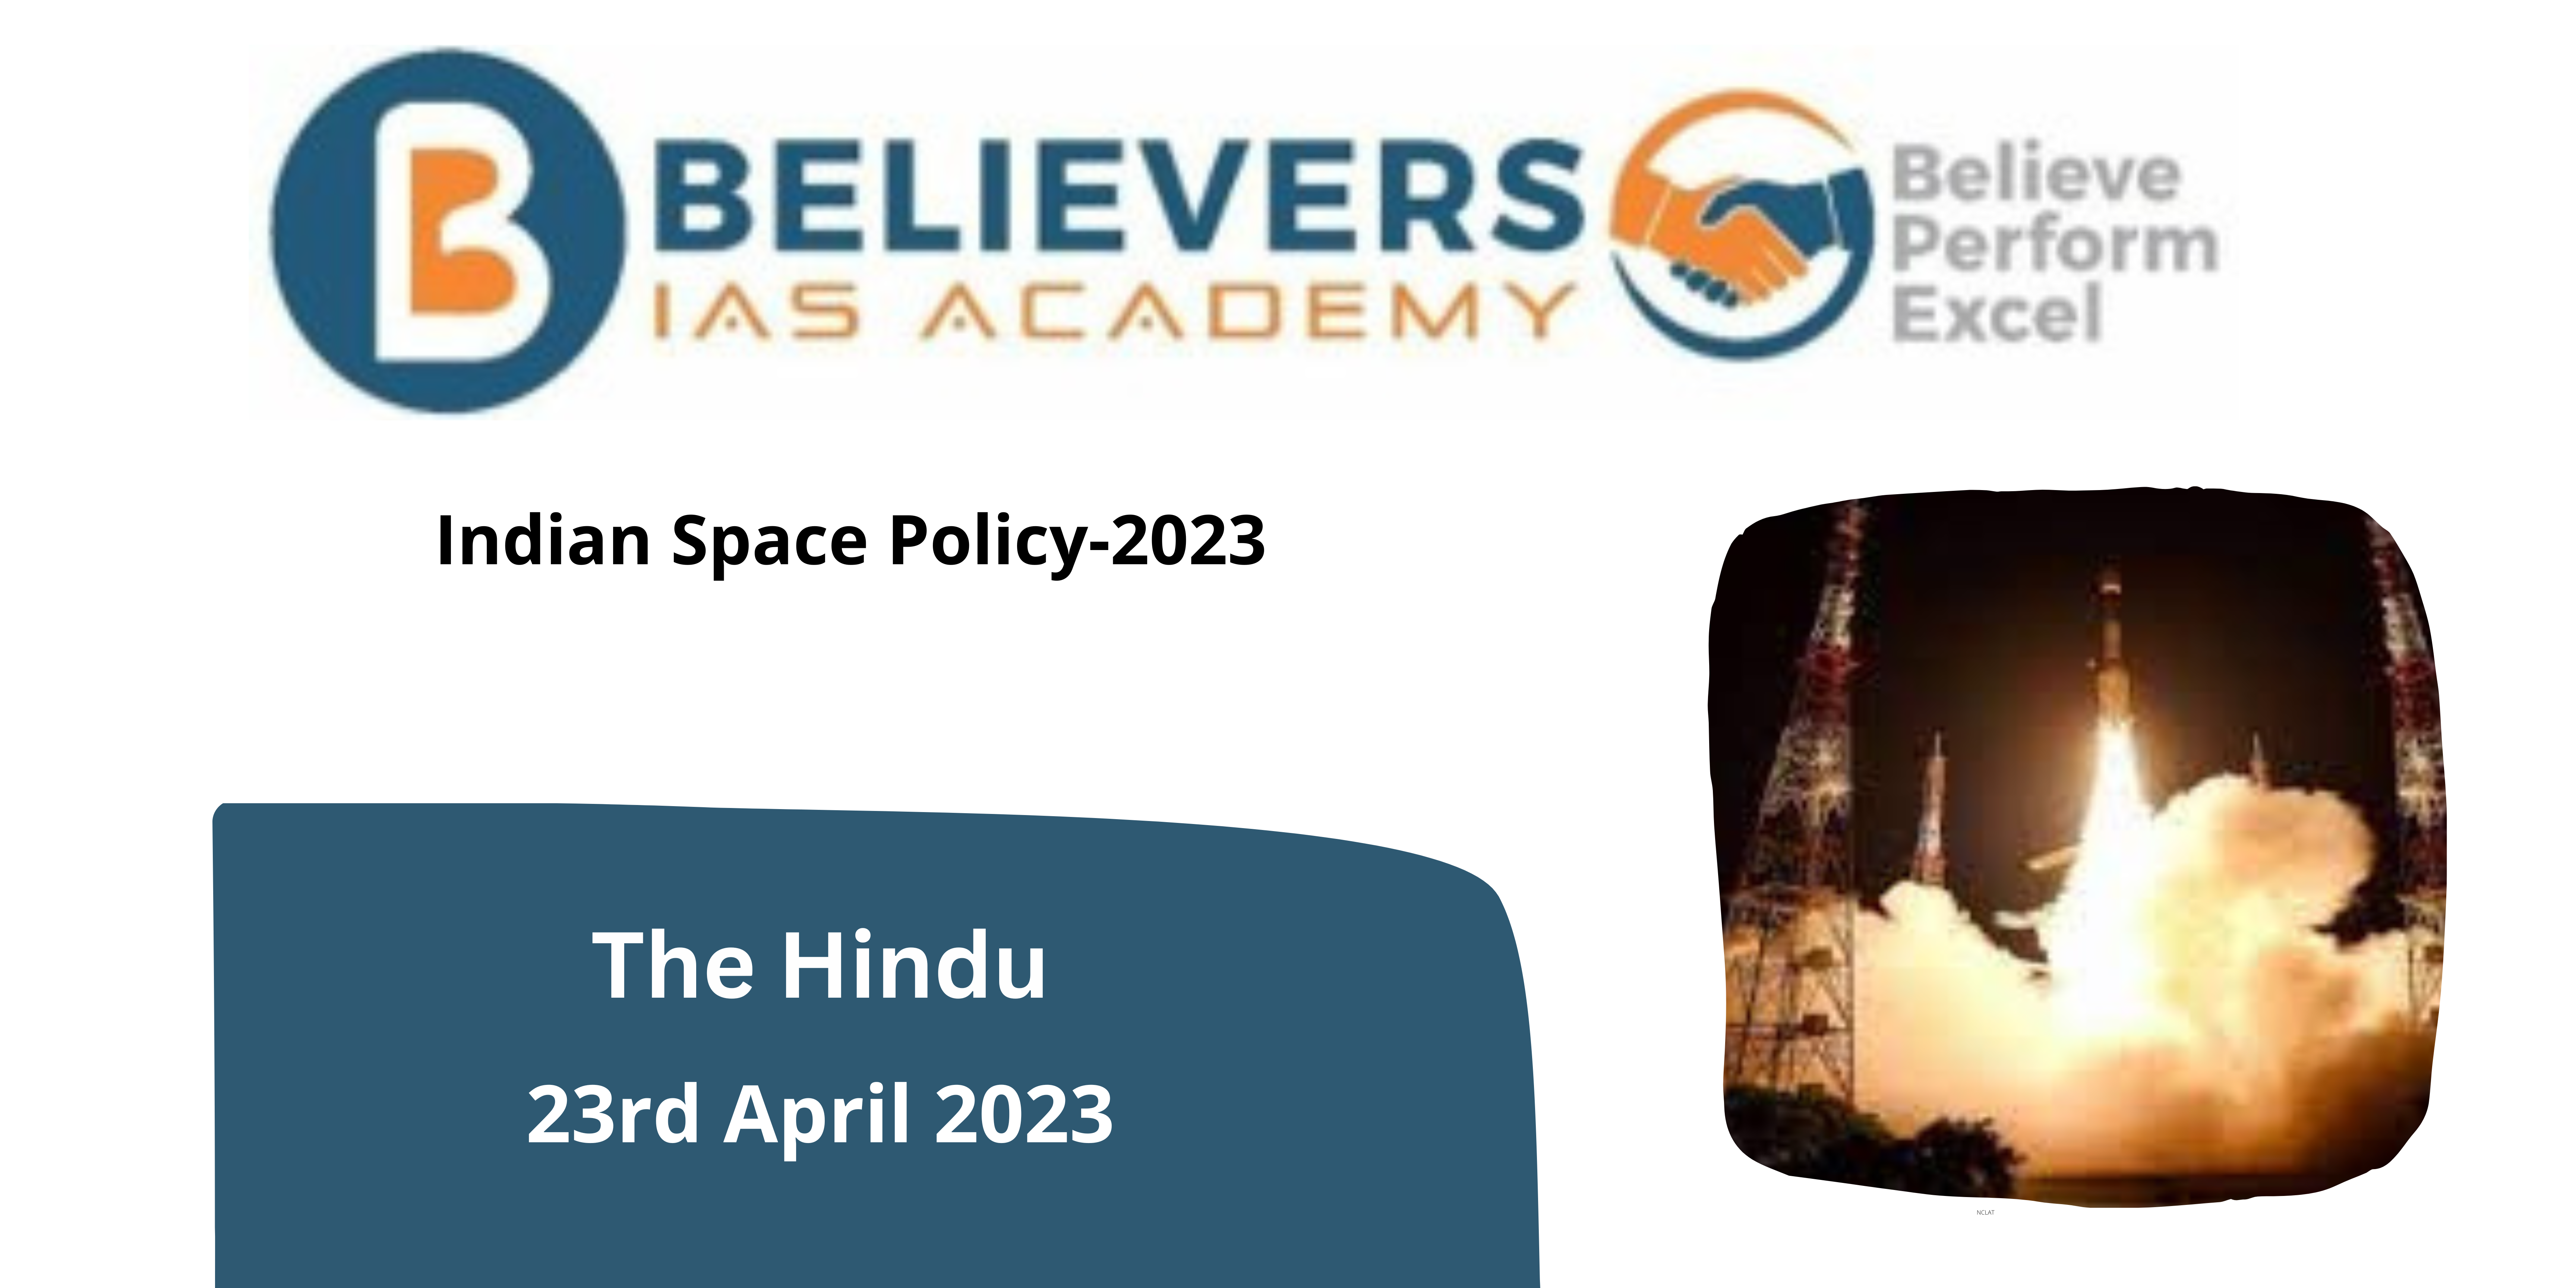 Indian Space Policy-2023